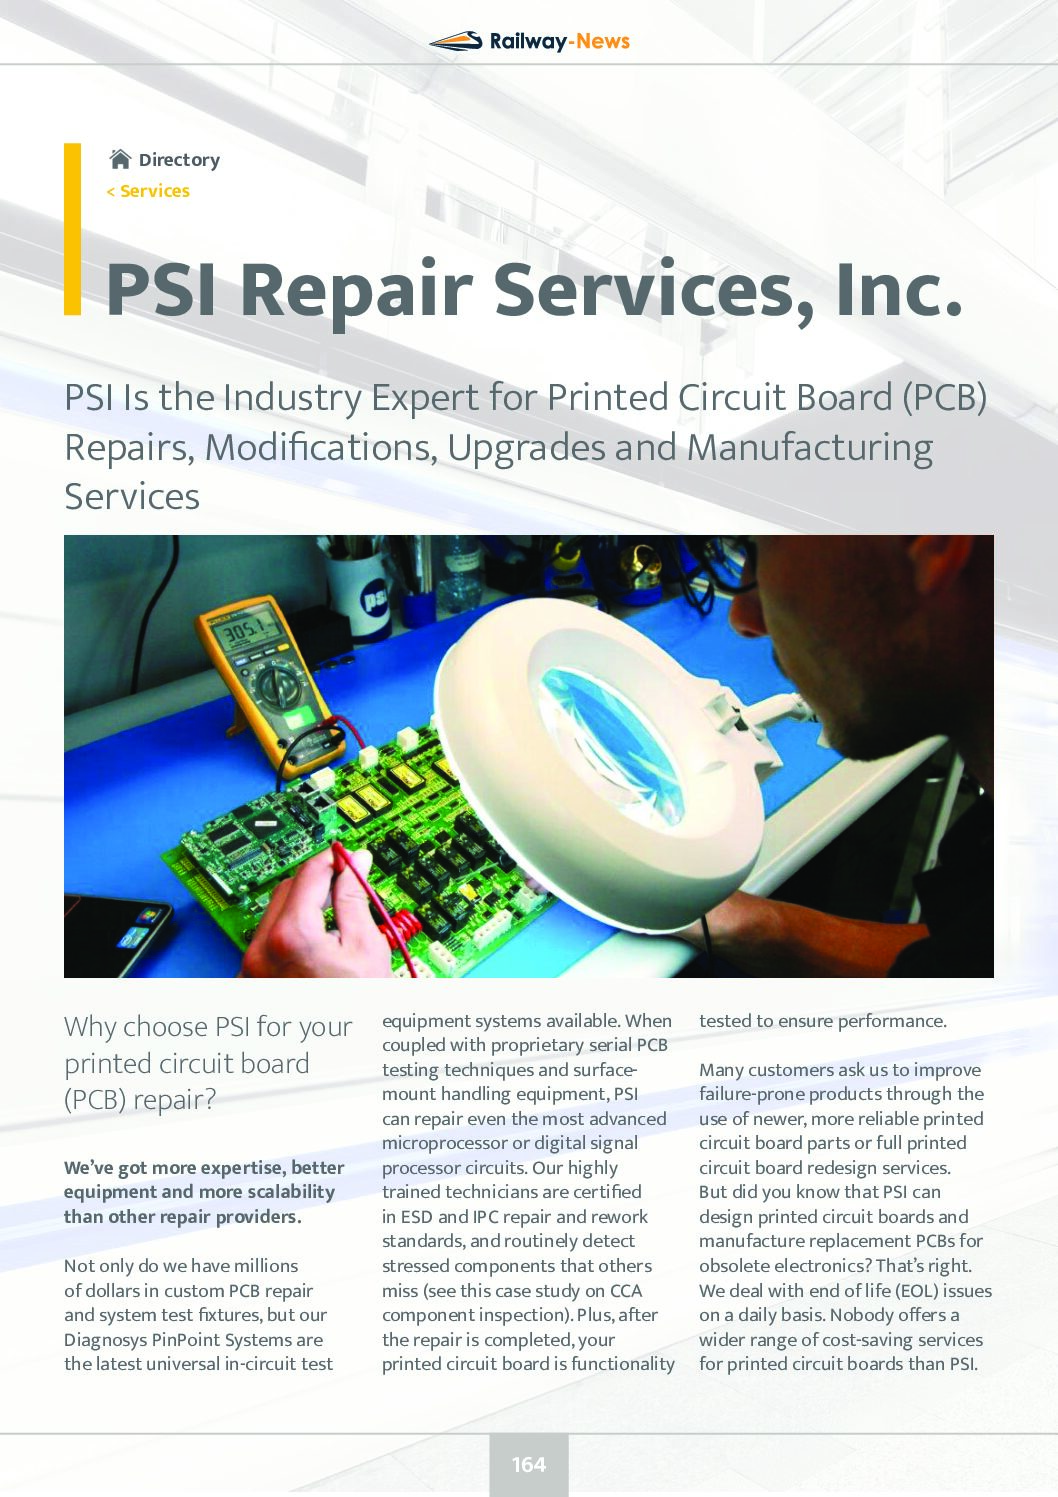 PSI: Industry Expert for Printed Circuit Board (PCB) Repairs, Modifications, Upgrades and Manufacturing